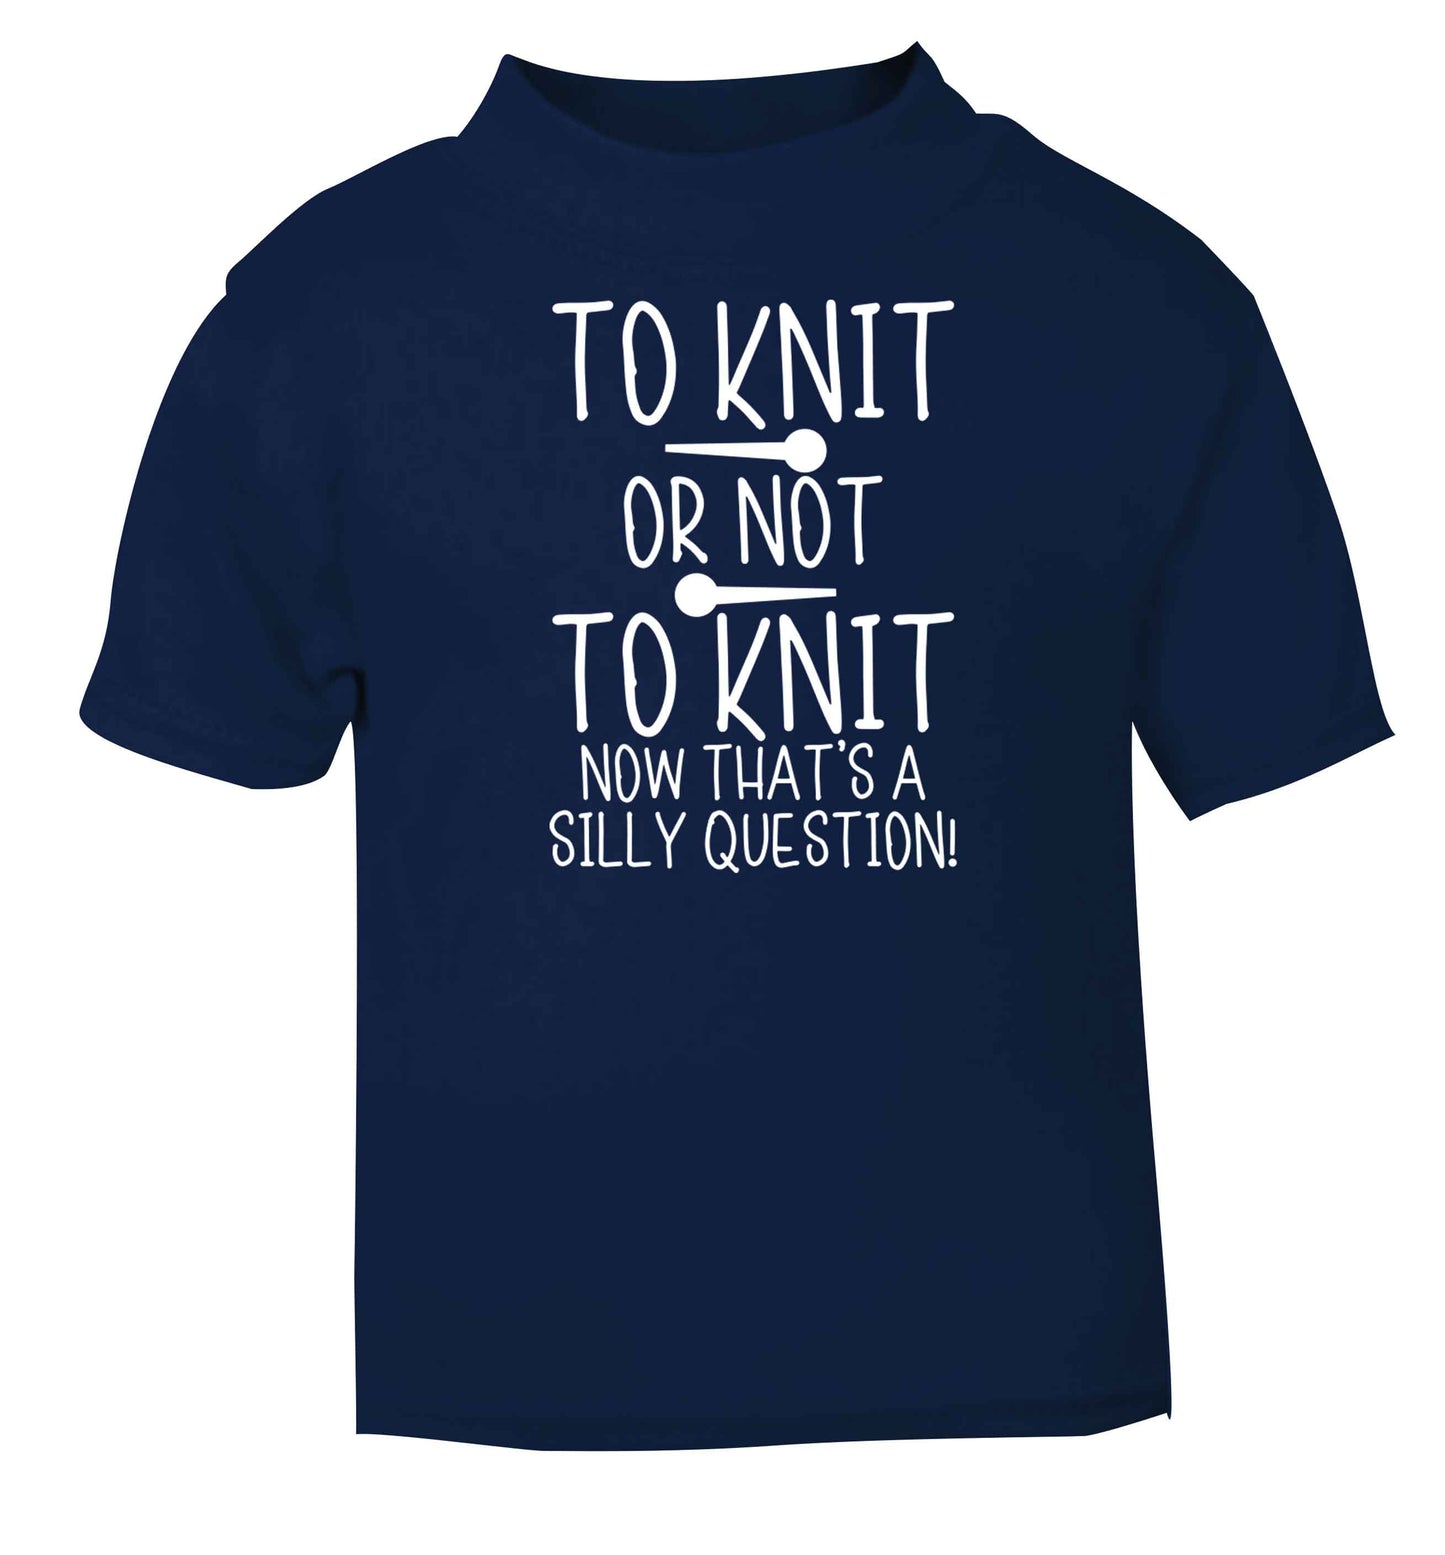 To knit or not to knit now that's a silly question navy baby toddler Tshirt 2 Years